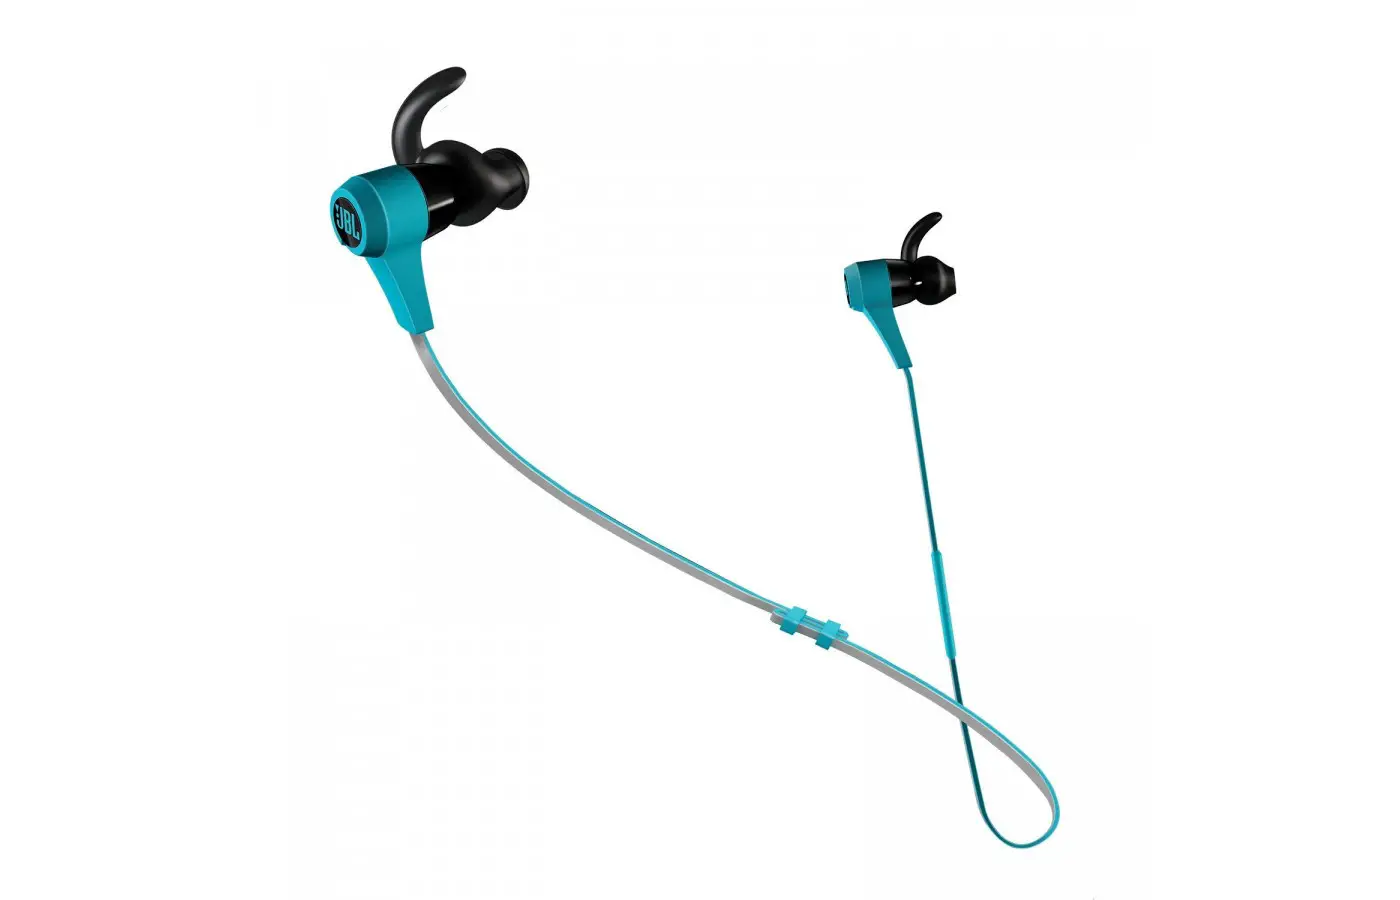 The Synchros Reflect BT can be worn for gym workouts, daily runs, or running errands. 